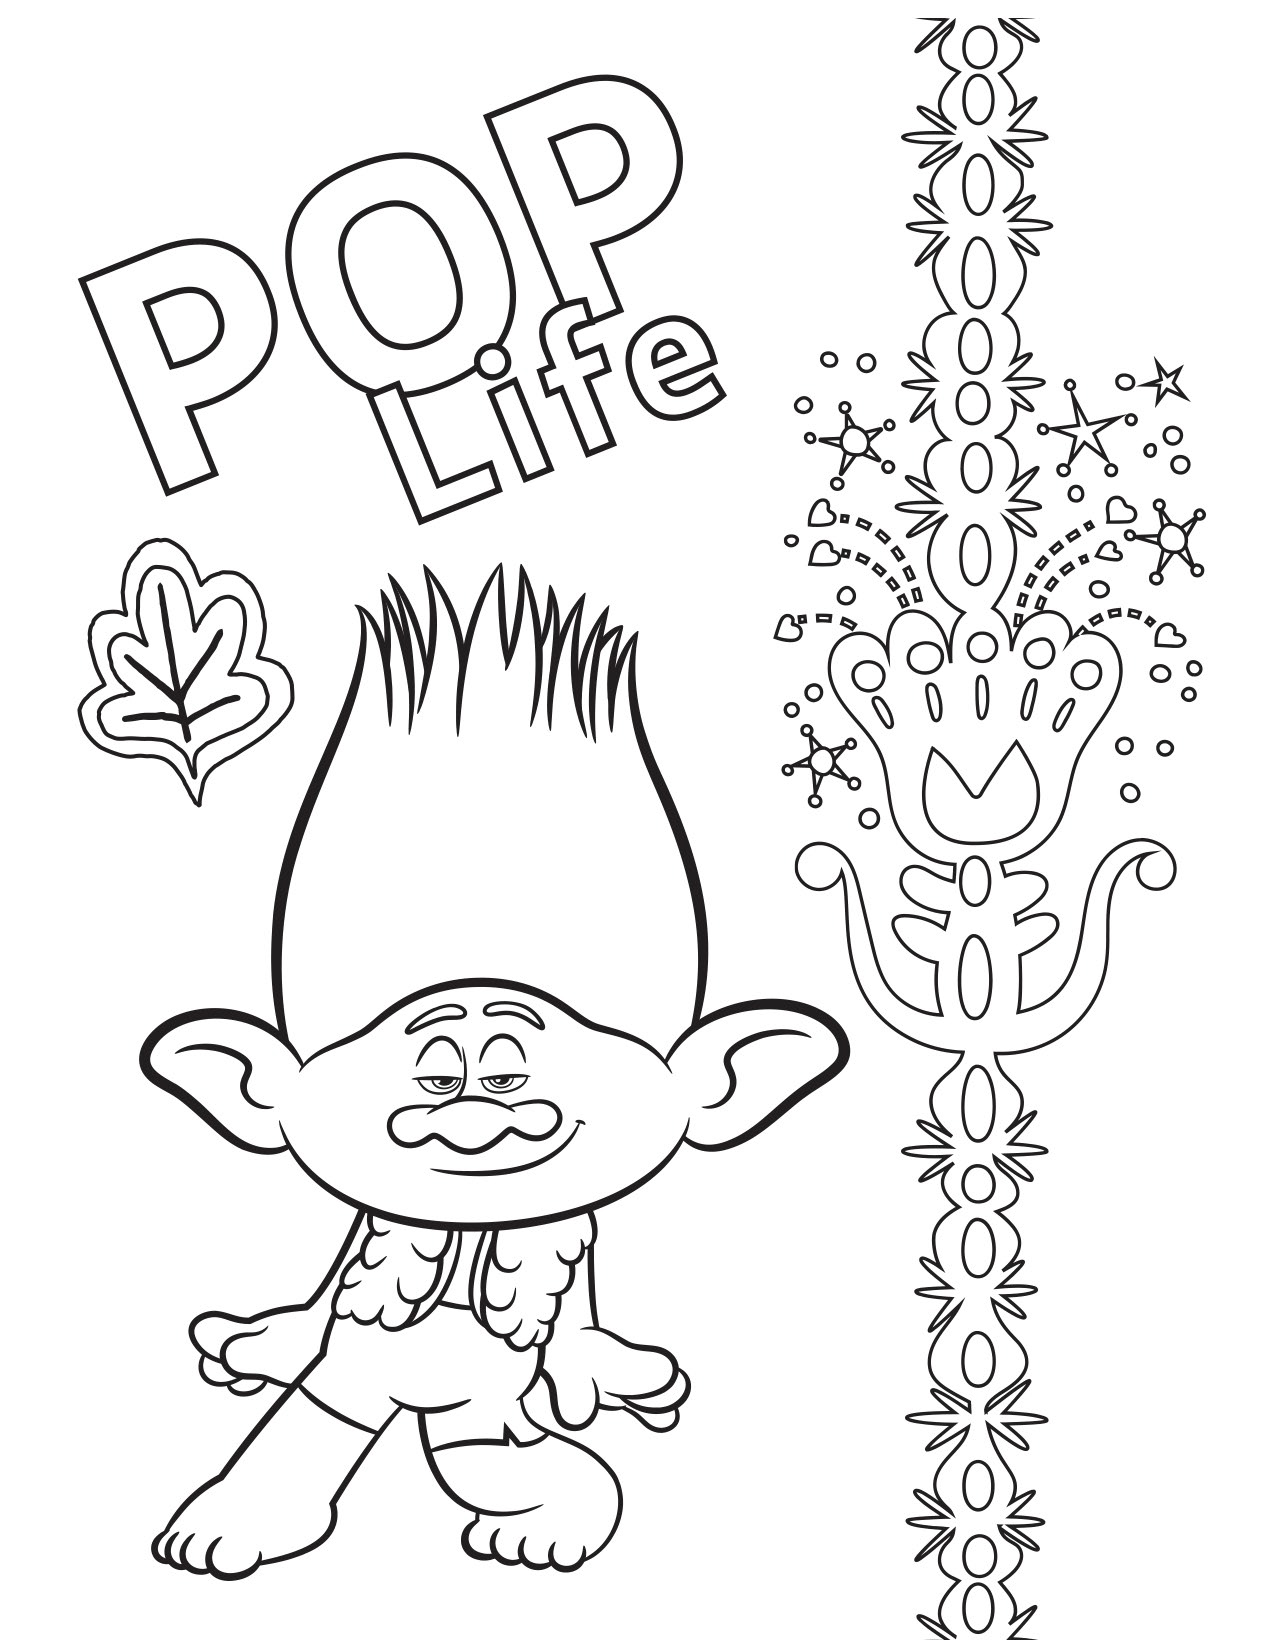 Trolls world tour coloring pages